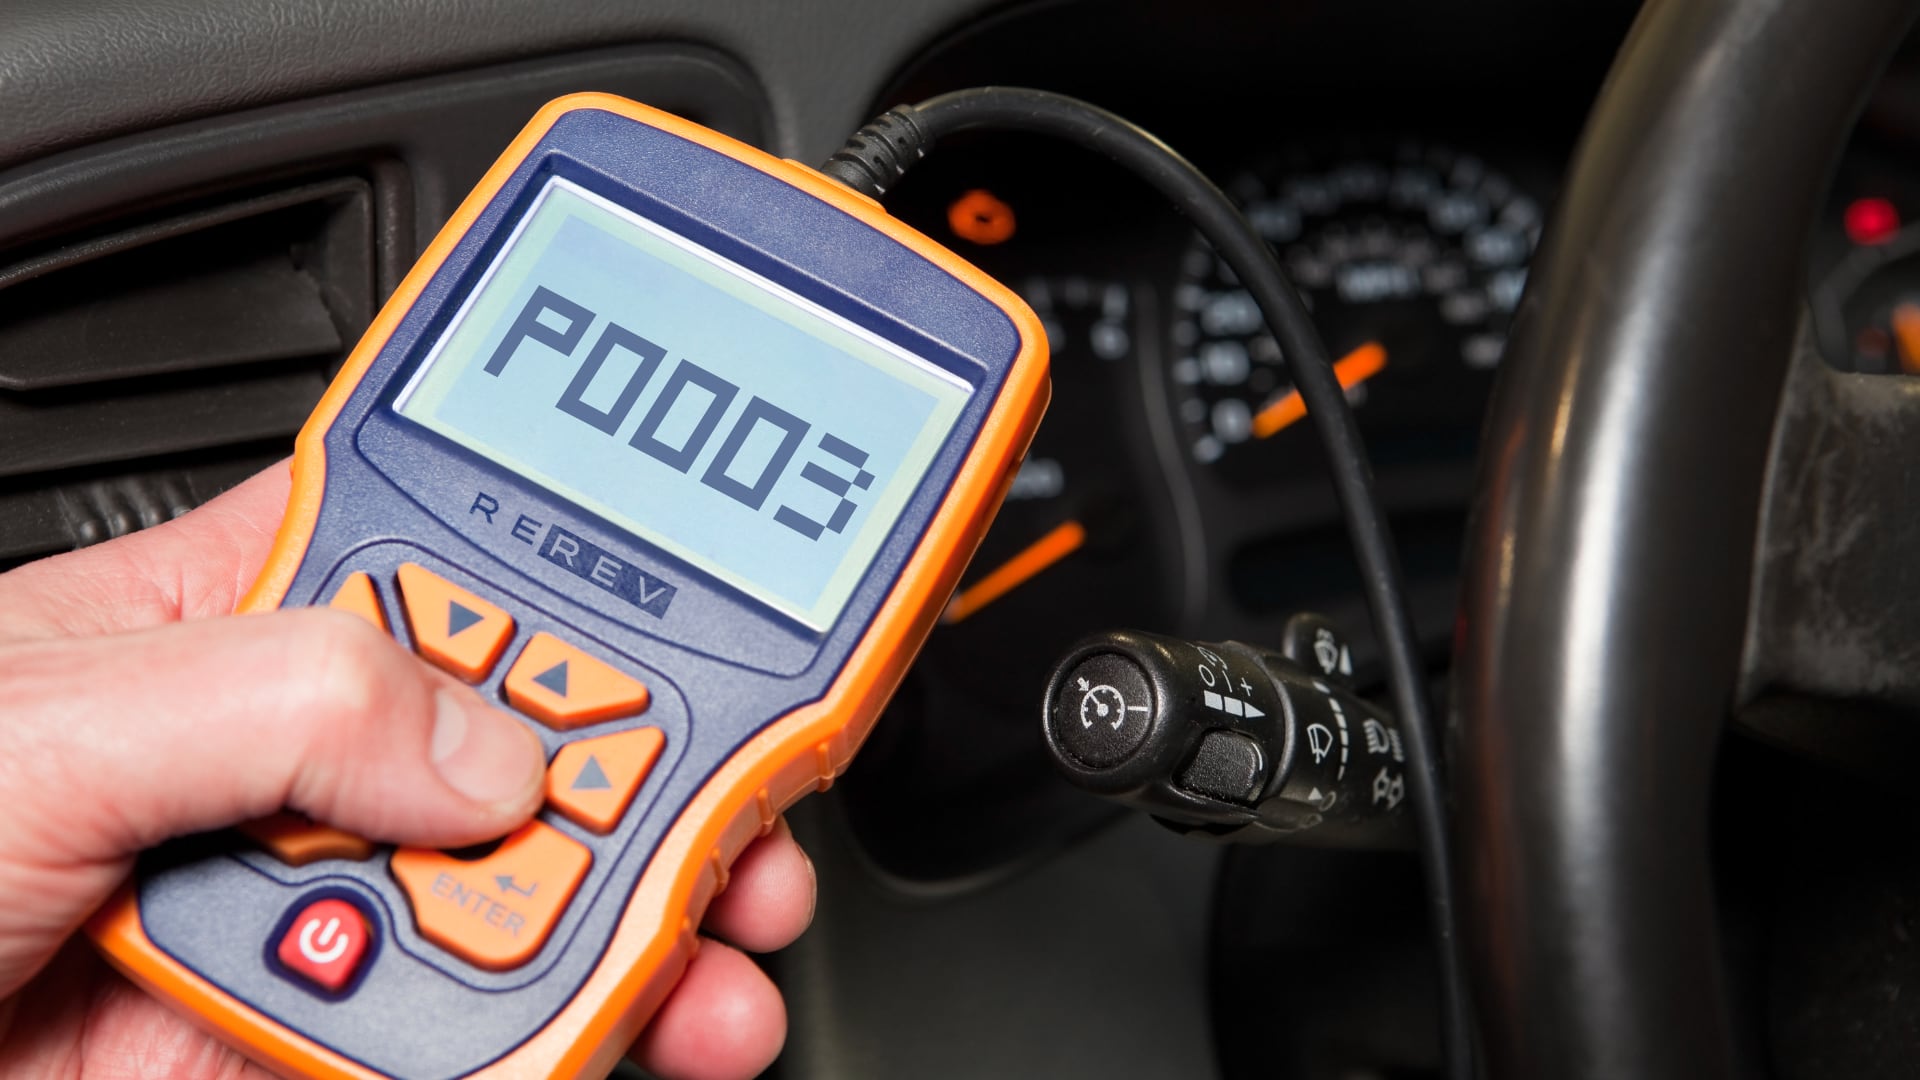 A person is holding a poodometer in a car.